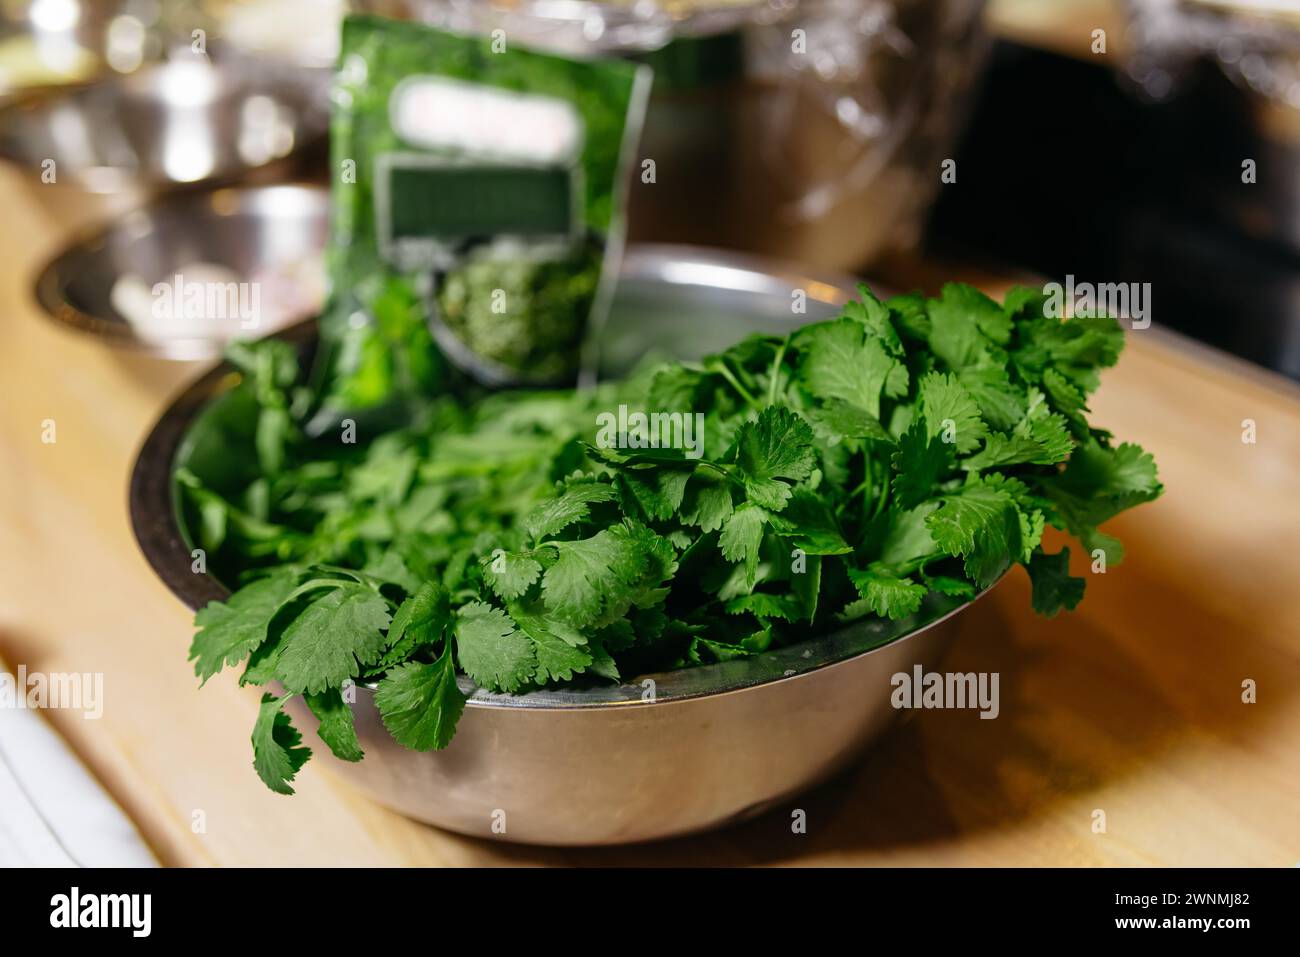 A stainless steel bowl filled with vibrant green cilantro leaves, ready for enhancing flavor in various dishes. Stock Photo